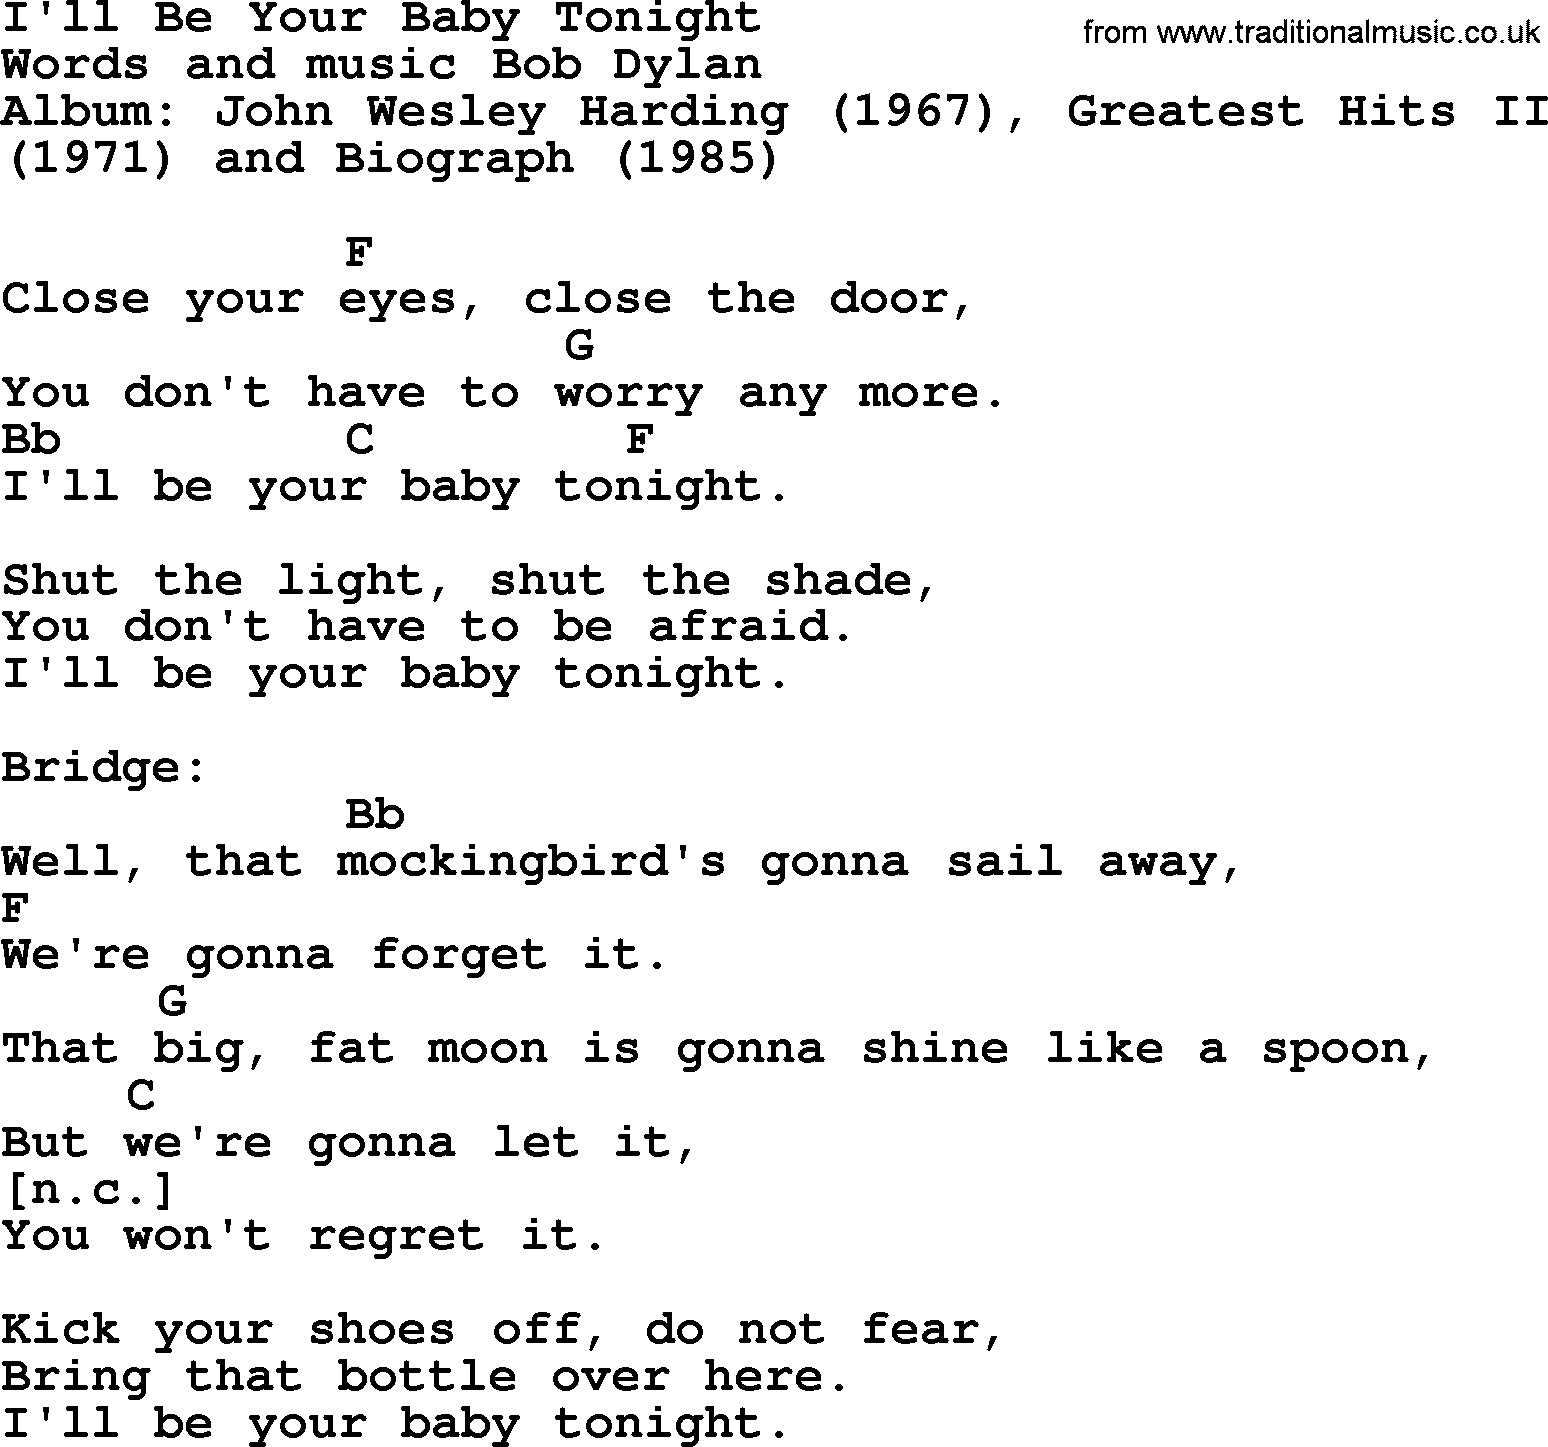 Bob Dylan song, lyrics with chords - I'll Be Your Baby Tonight